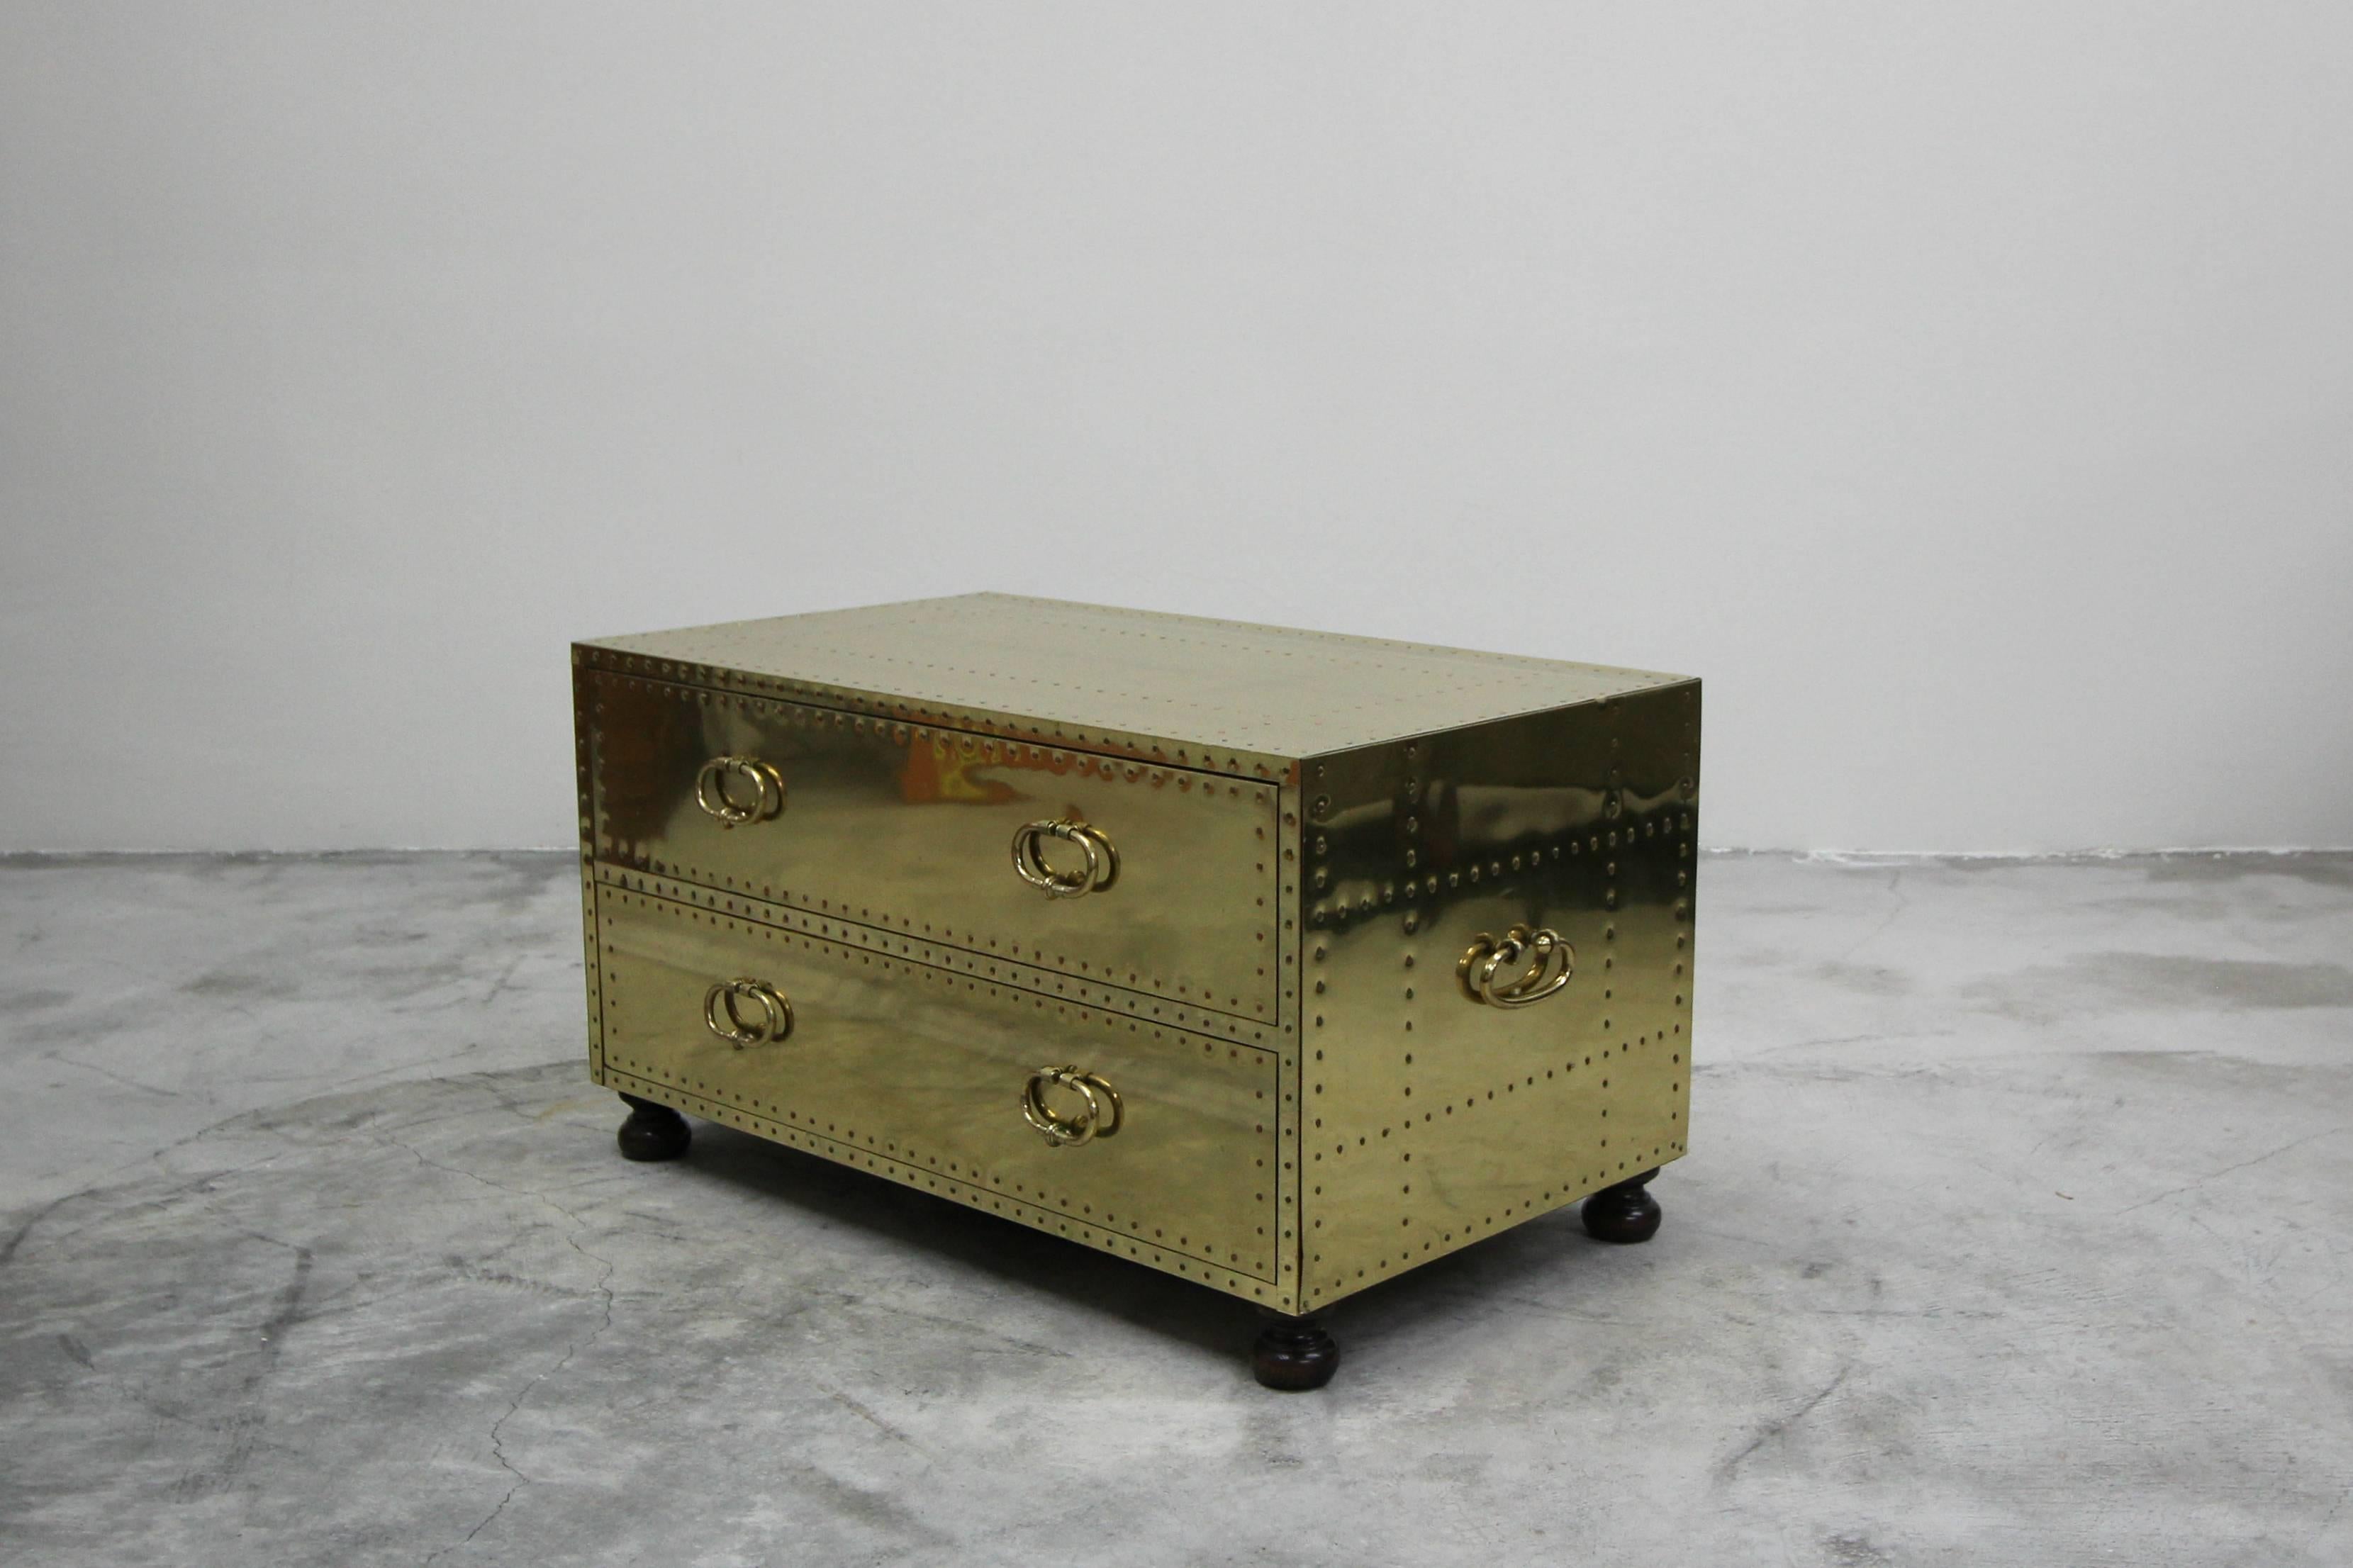 Beautiful brass two drawer chest made in Spain by Sarreid. Could be used as a coffee table, bench or even a bedside table. Sits on four bun feet.

Almost mint condition, with little to no patina and minimal surface scratches.
